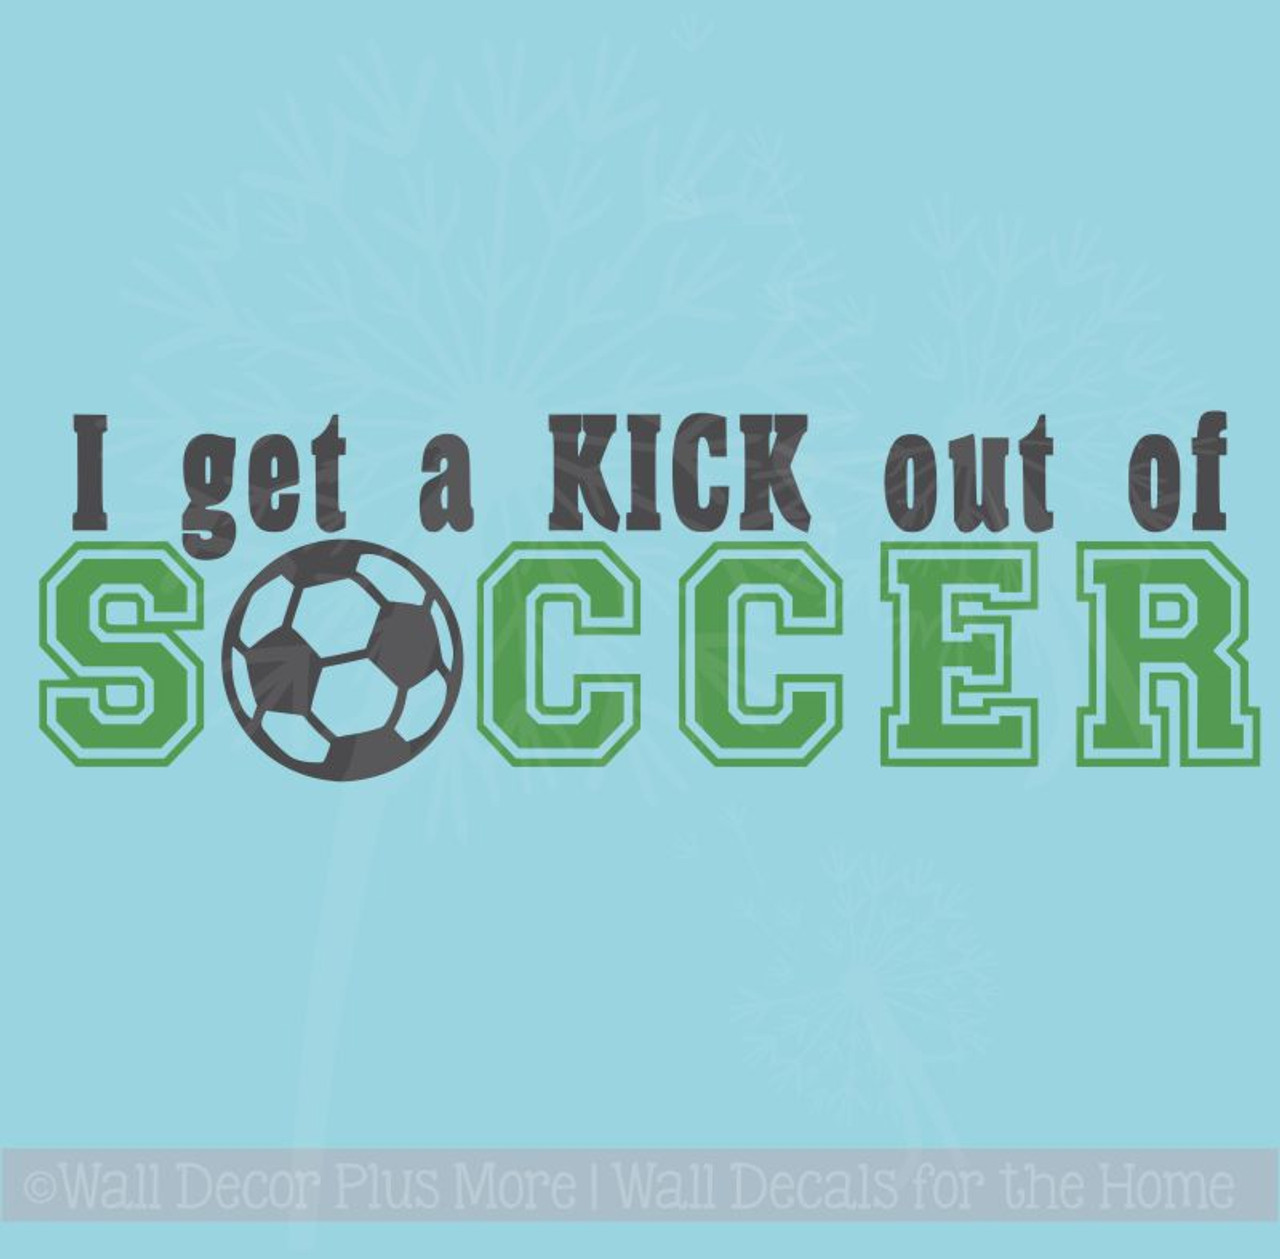 Kick Out Of Soccer Sports Decals Wall Stickers Vinyl Lettering Art Boy Bedroom Decor